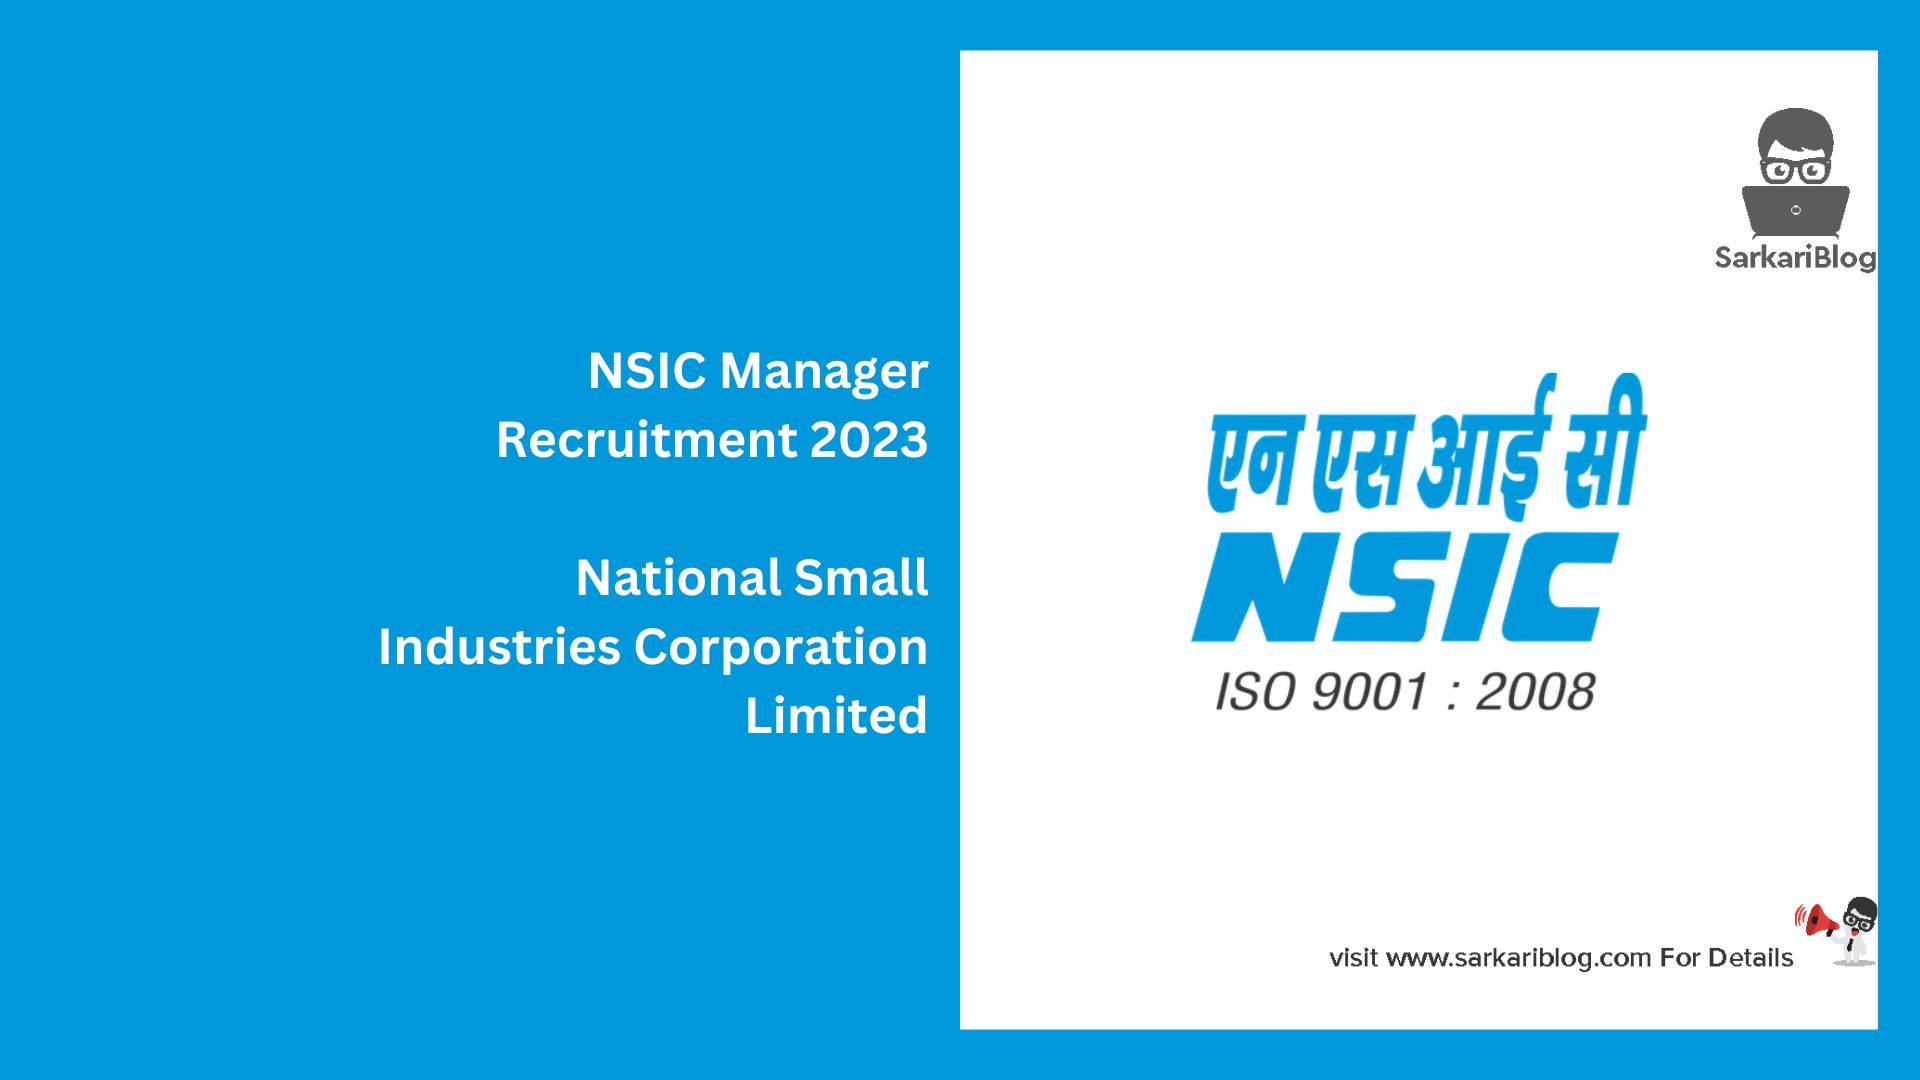 NSIC Manager Recruitment 2023